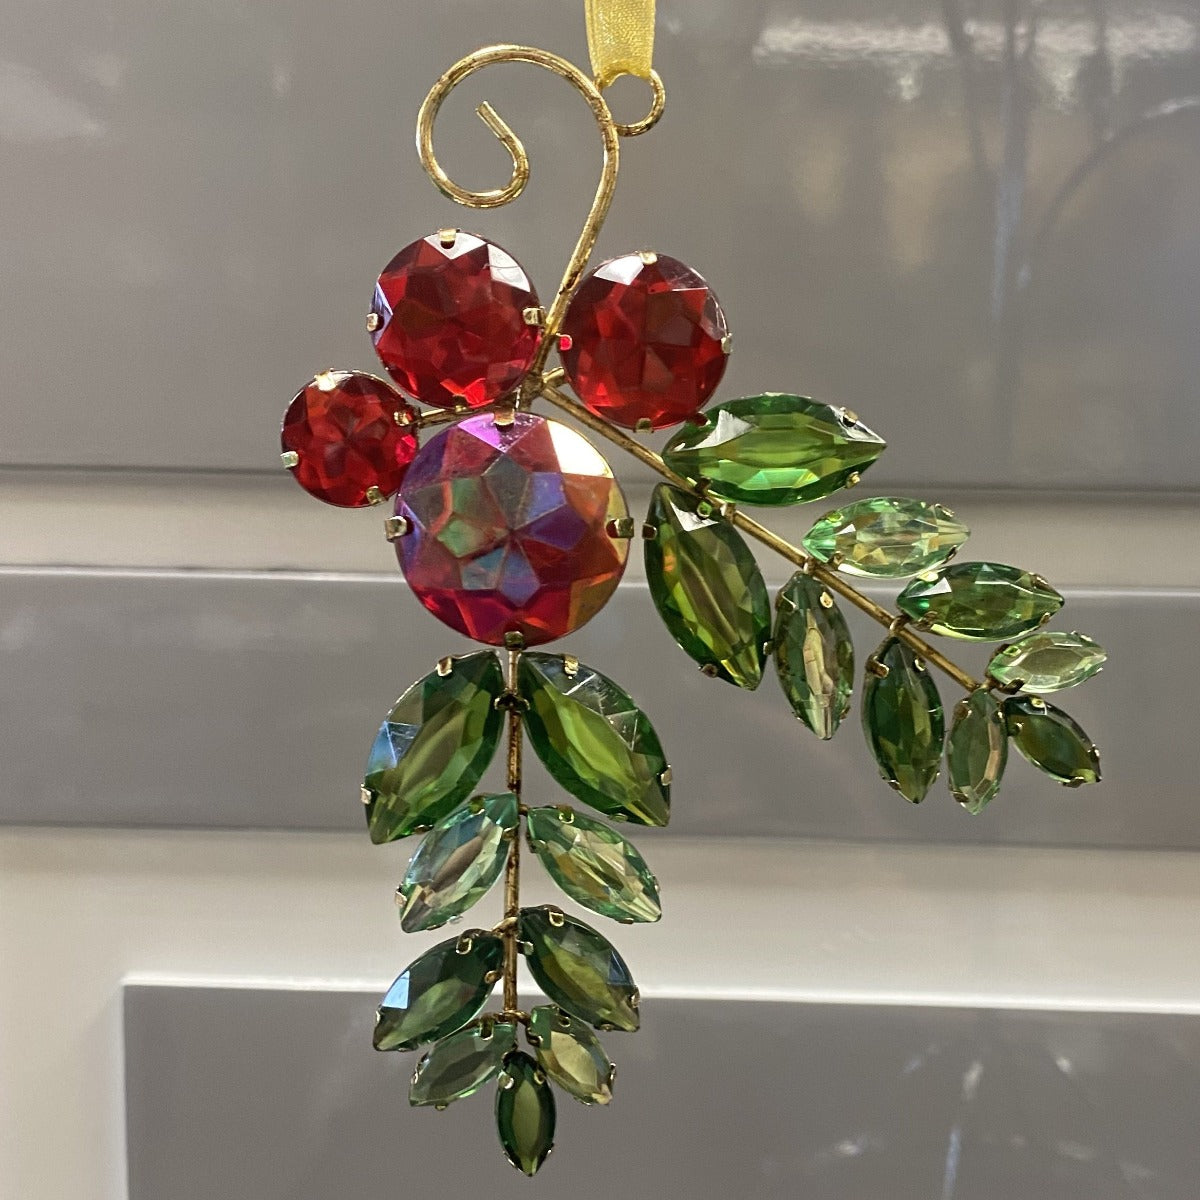 Gisela Graham Glass Jewel Christmas Ornament  This beautifully festive Glass Jewel from Gisela Graham is the perfect way to add a touch of glitter to your tree this Christmas